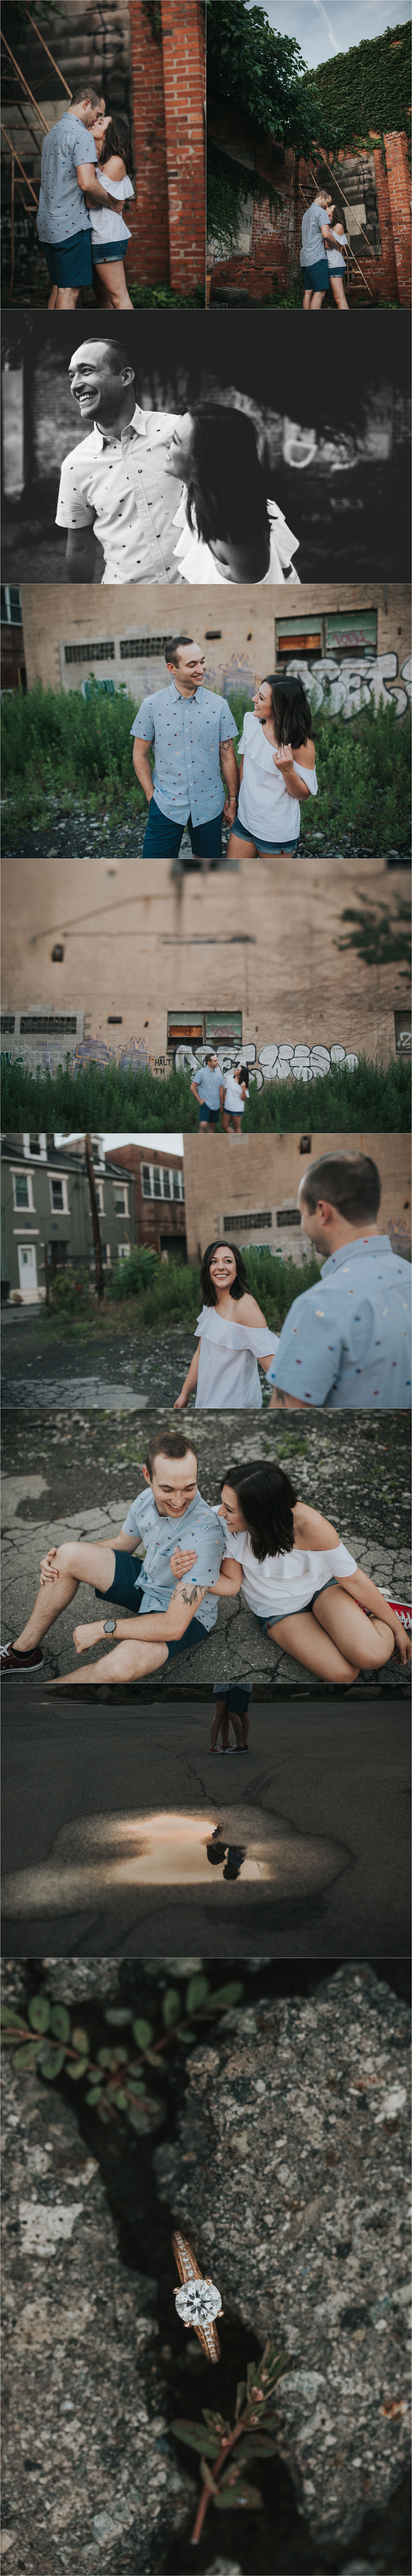 05-summer-engagement-session-lawrenceville-pittsburgh-pa.jpg